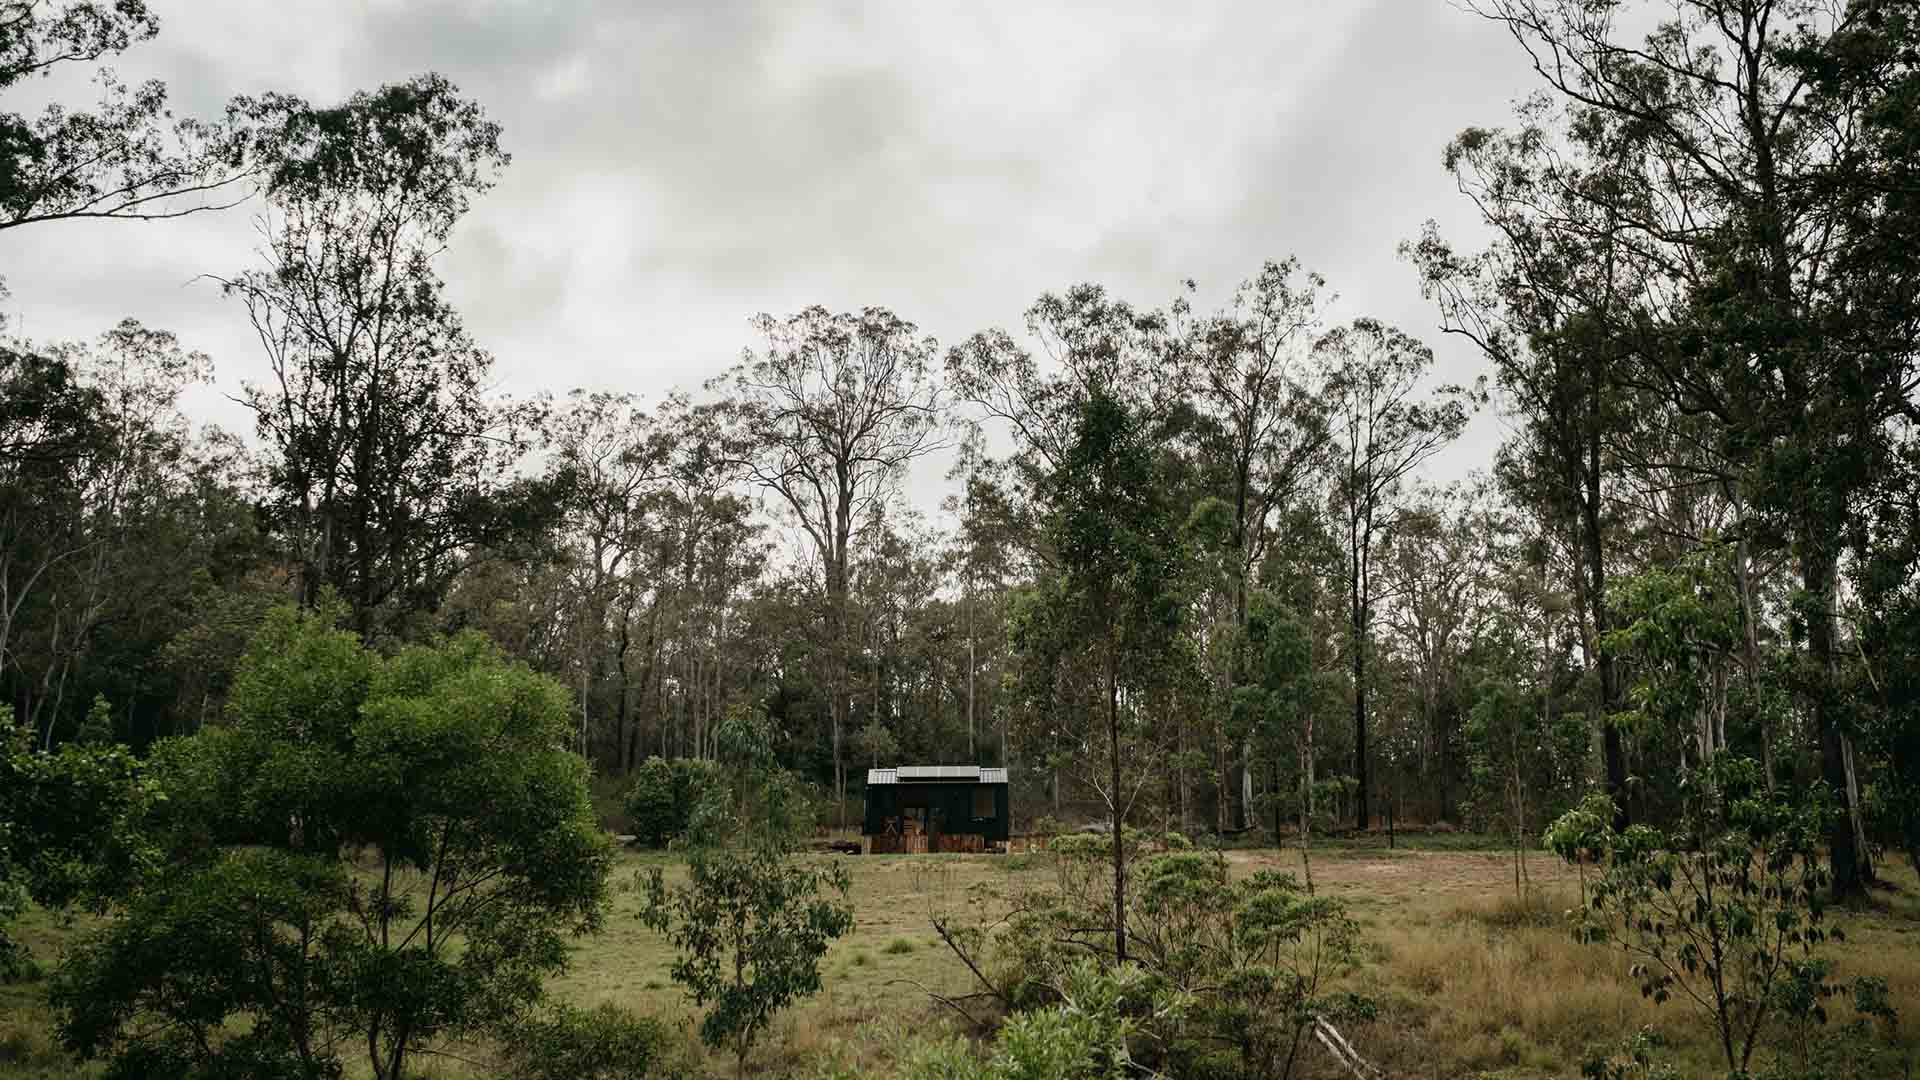 Two New Off-the-Grid Unyoked Tiny Cabins with Outdoor Baths Have Popped Up Near Byron Bay